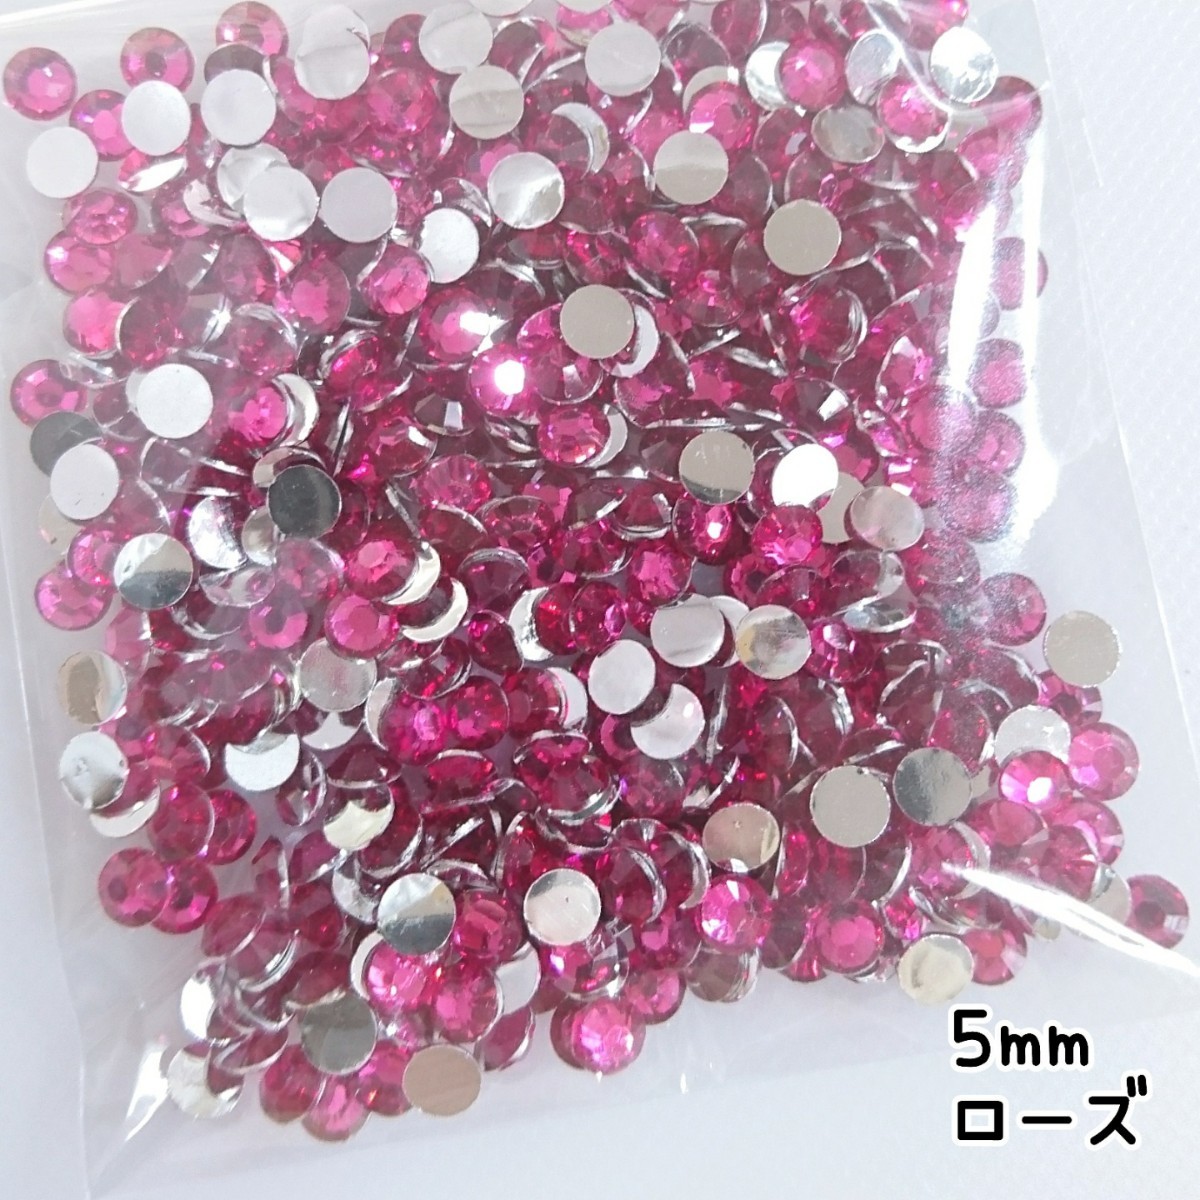  macromolecule Stone 5mm( rose ) approximately 700 bead | deco parts nails * anonymity delivery 